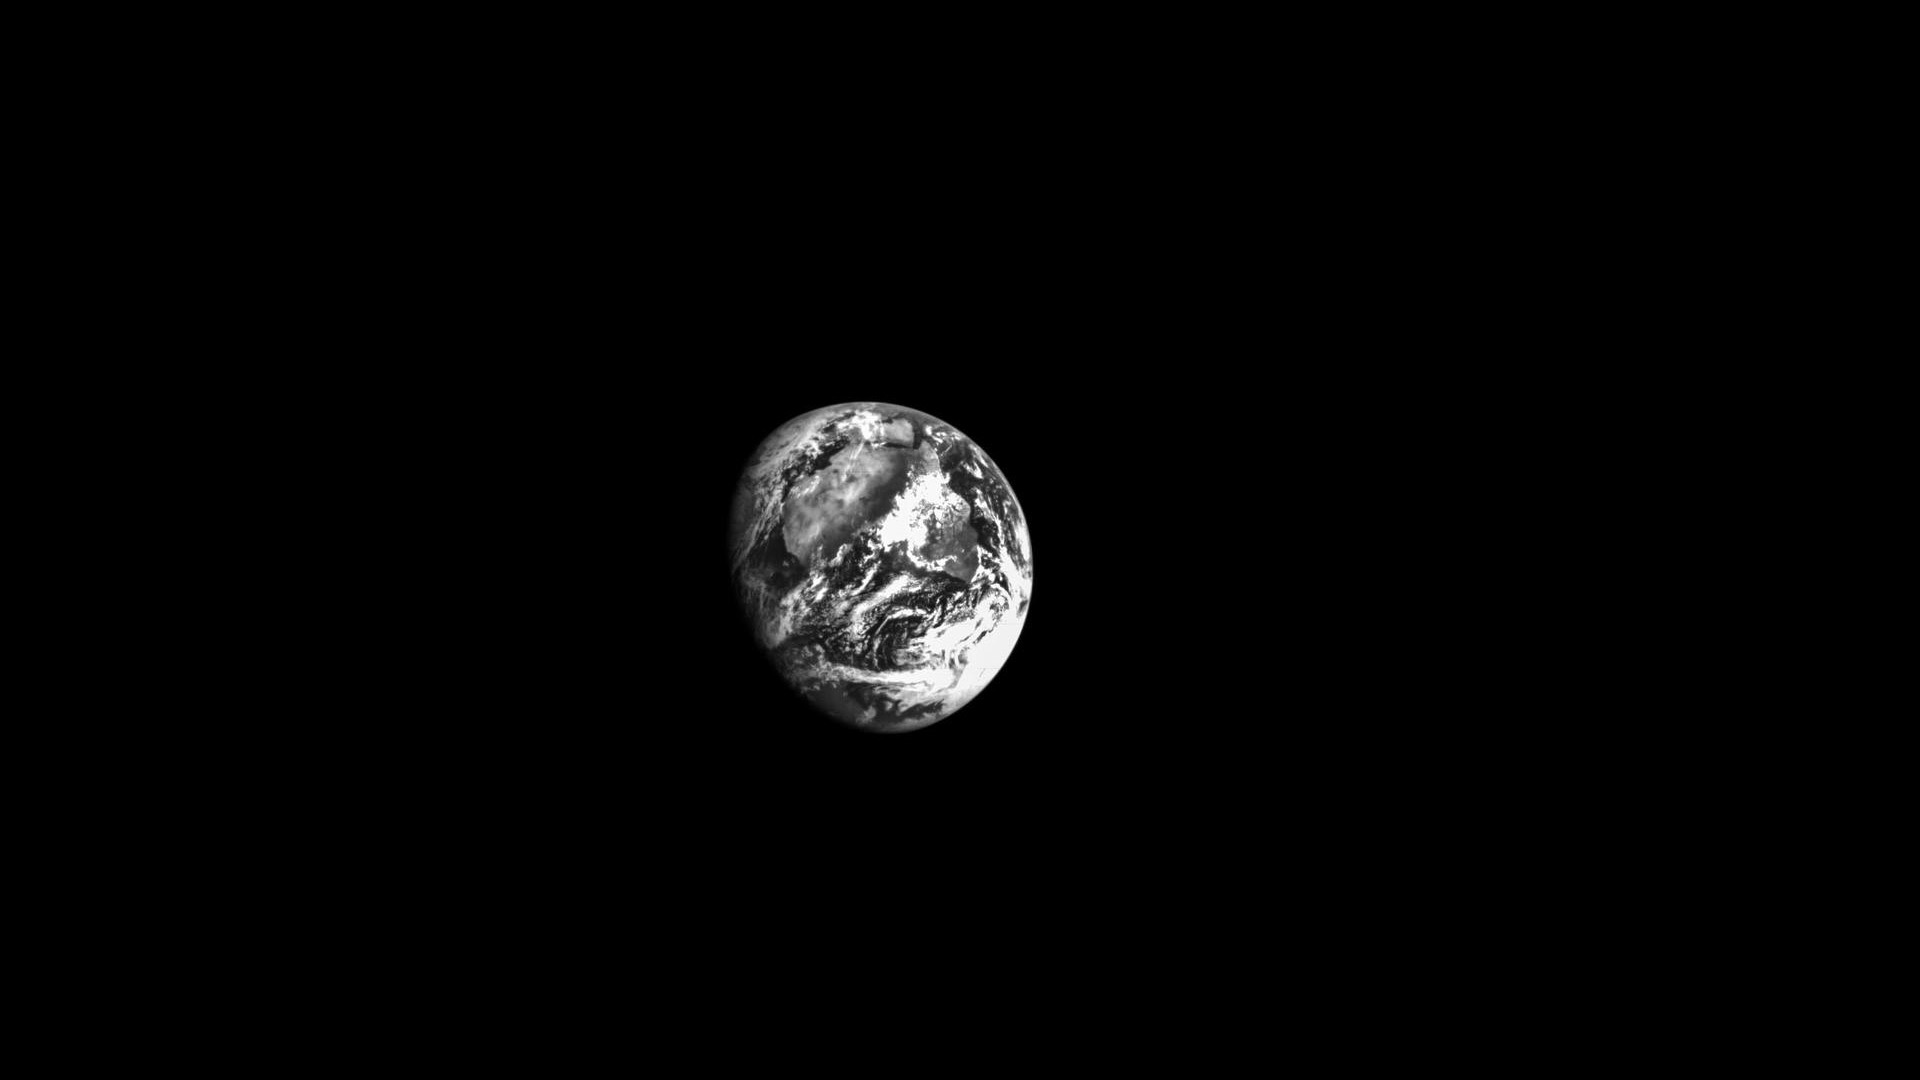 earth at a distance in black and white surrounded by black of space